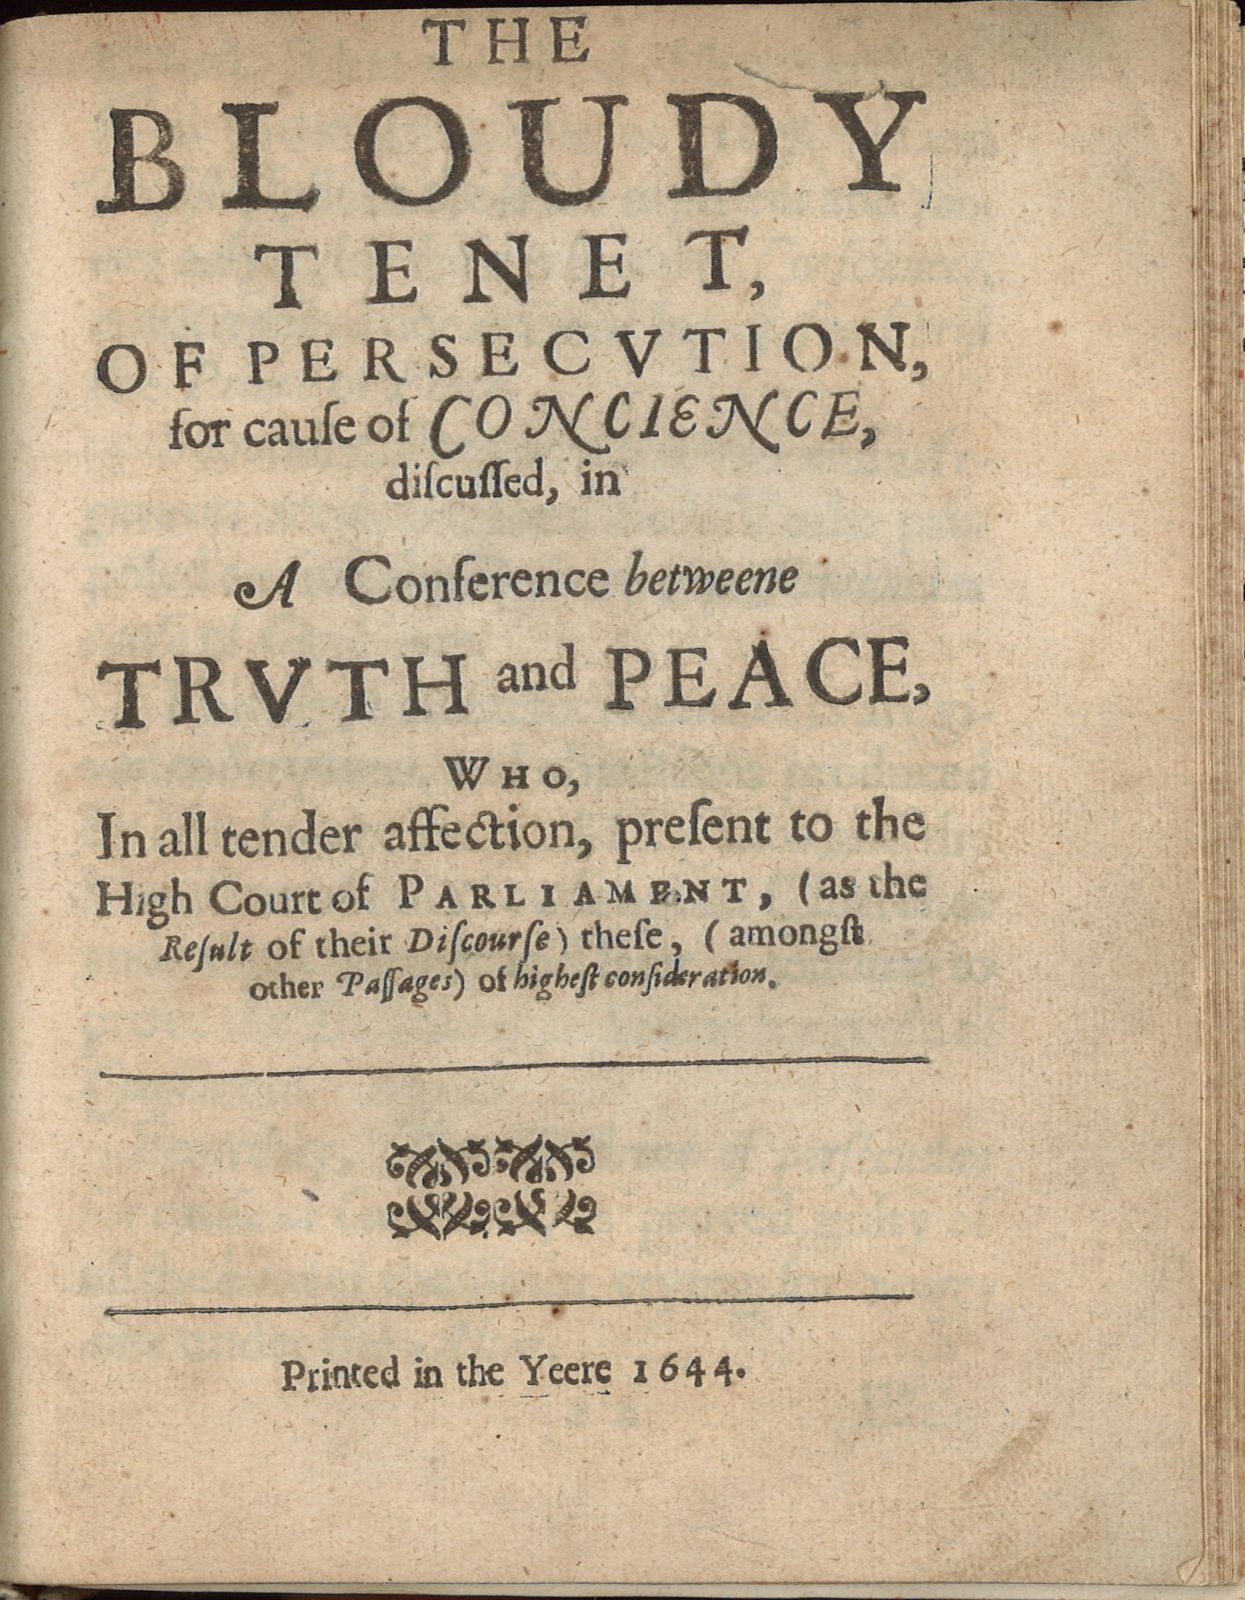 In 1644, Williams published The Bloudy Tenent of Persecution which is considered his most famous work. It is a fierce attack on religious and political intolerance in both Old England and New. He advocated for free thought and belief because he believed it was the only means to true faith and religion. His ideas raised questions and challenges but his ideas endured over time.